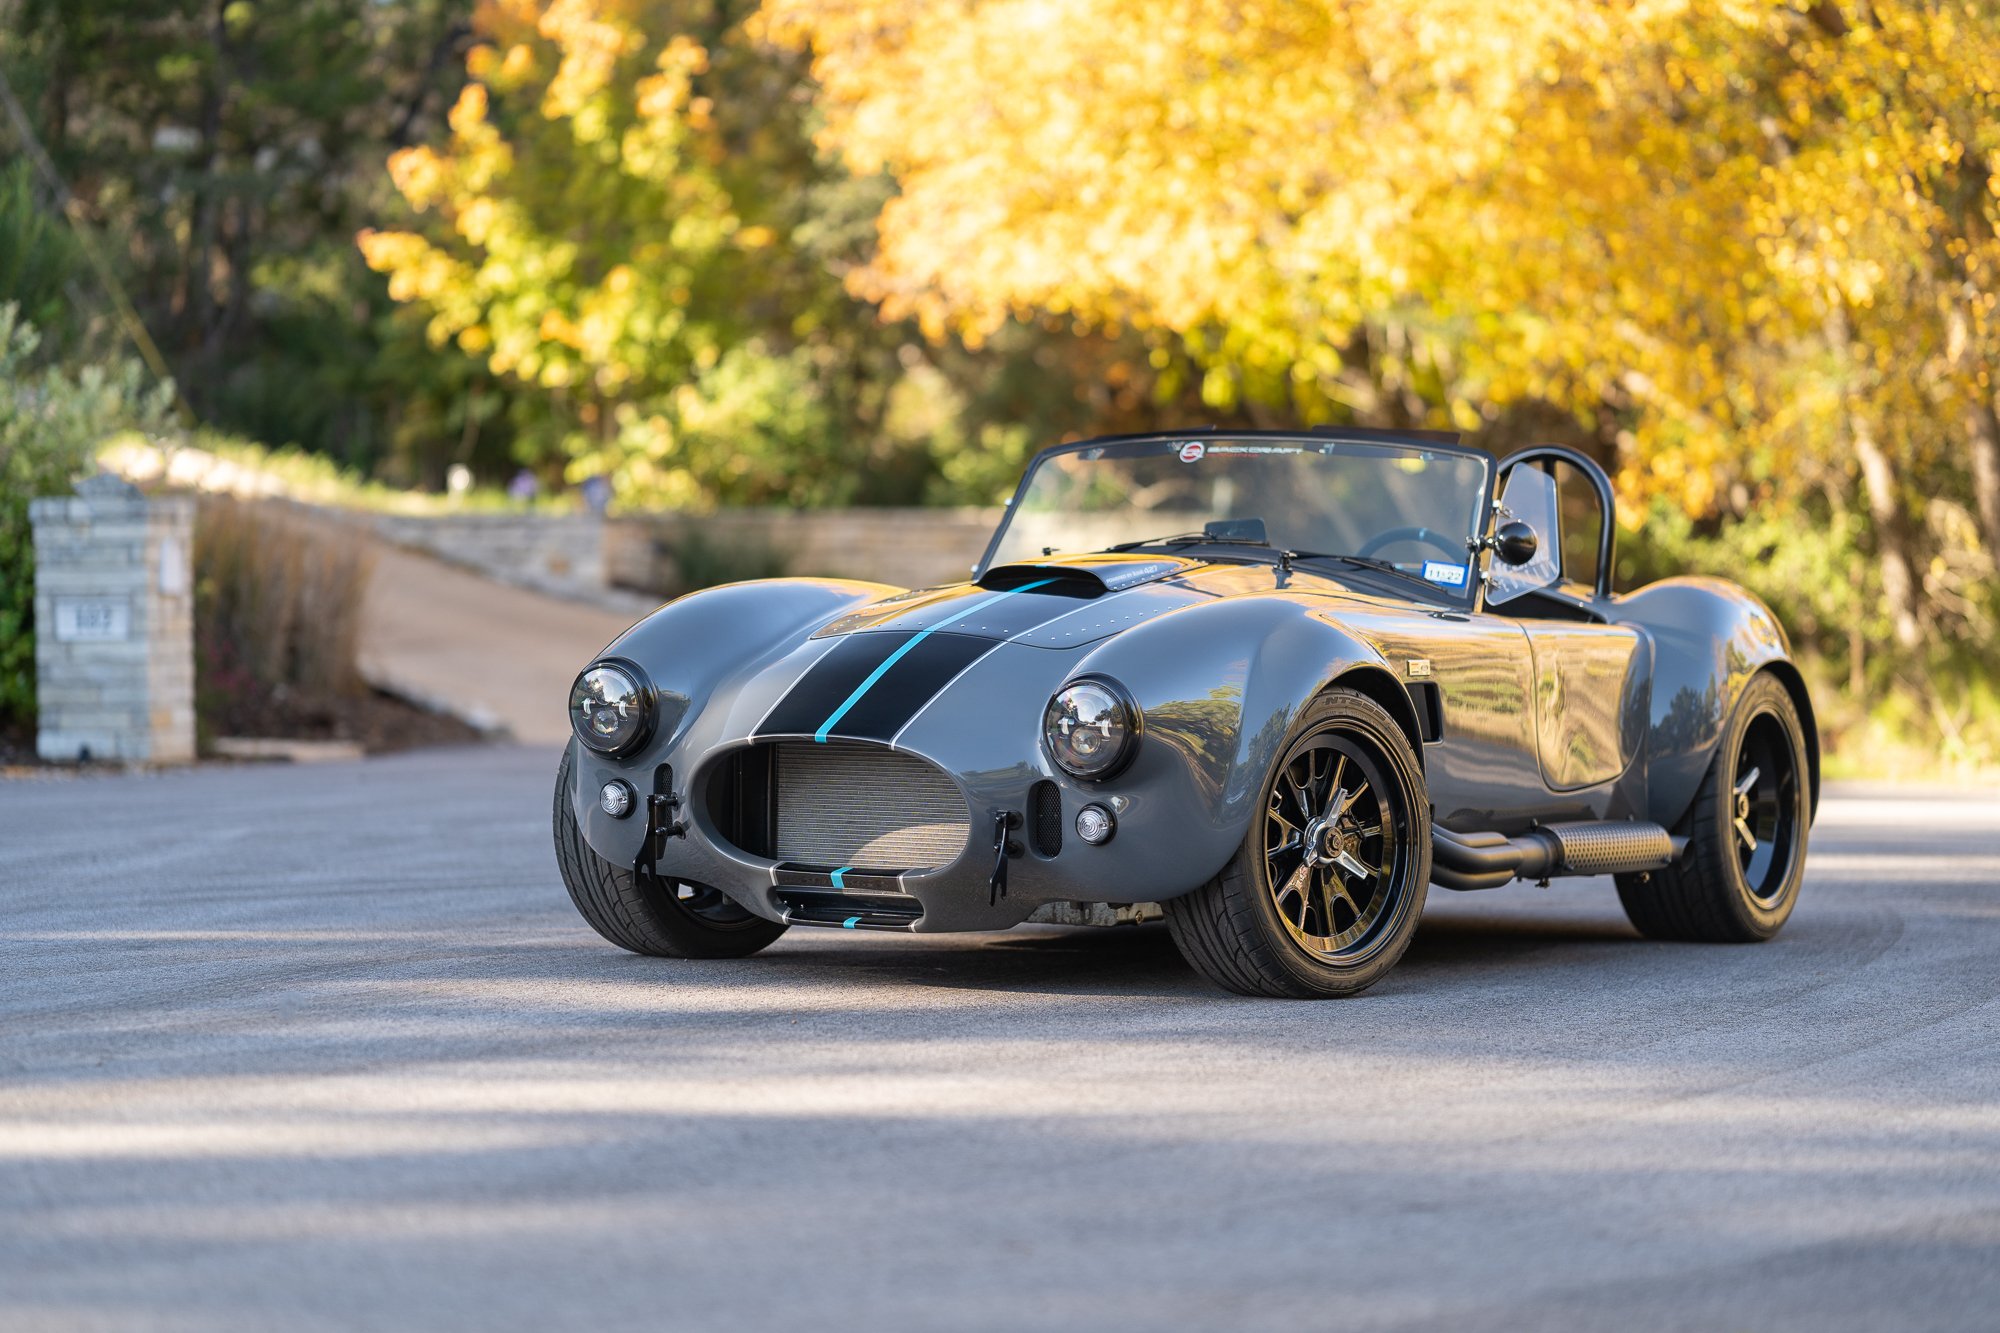 Backdraft Cobra powered by an Iconic 427